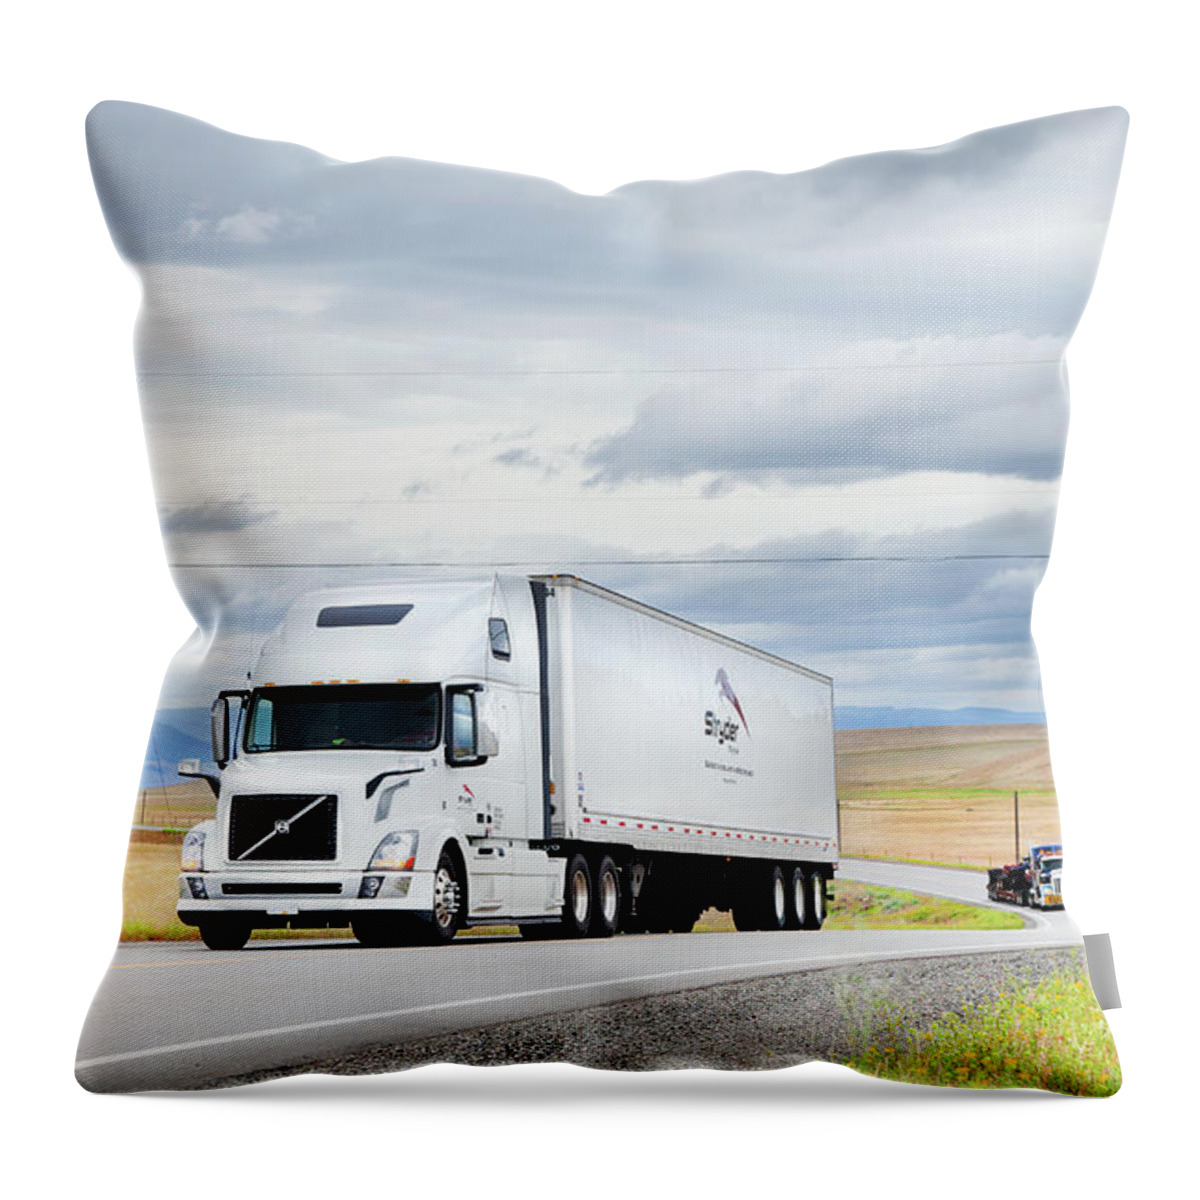  Truck Throw Pillow featuring the photograph Truckin' Down The Highway by Theresa Tahara